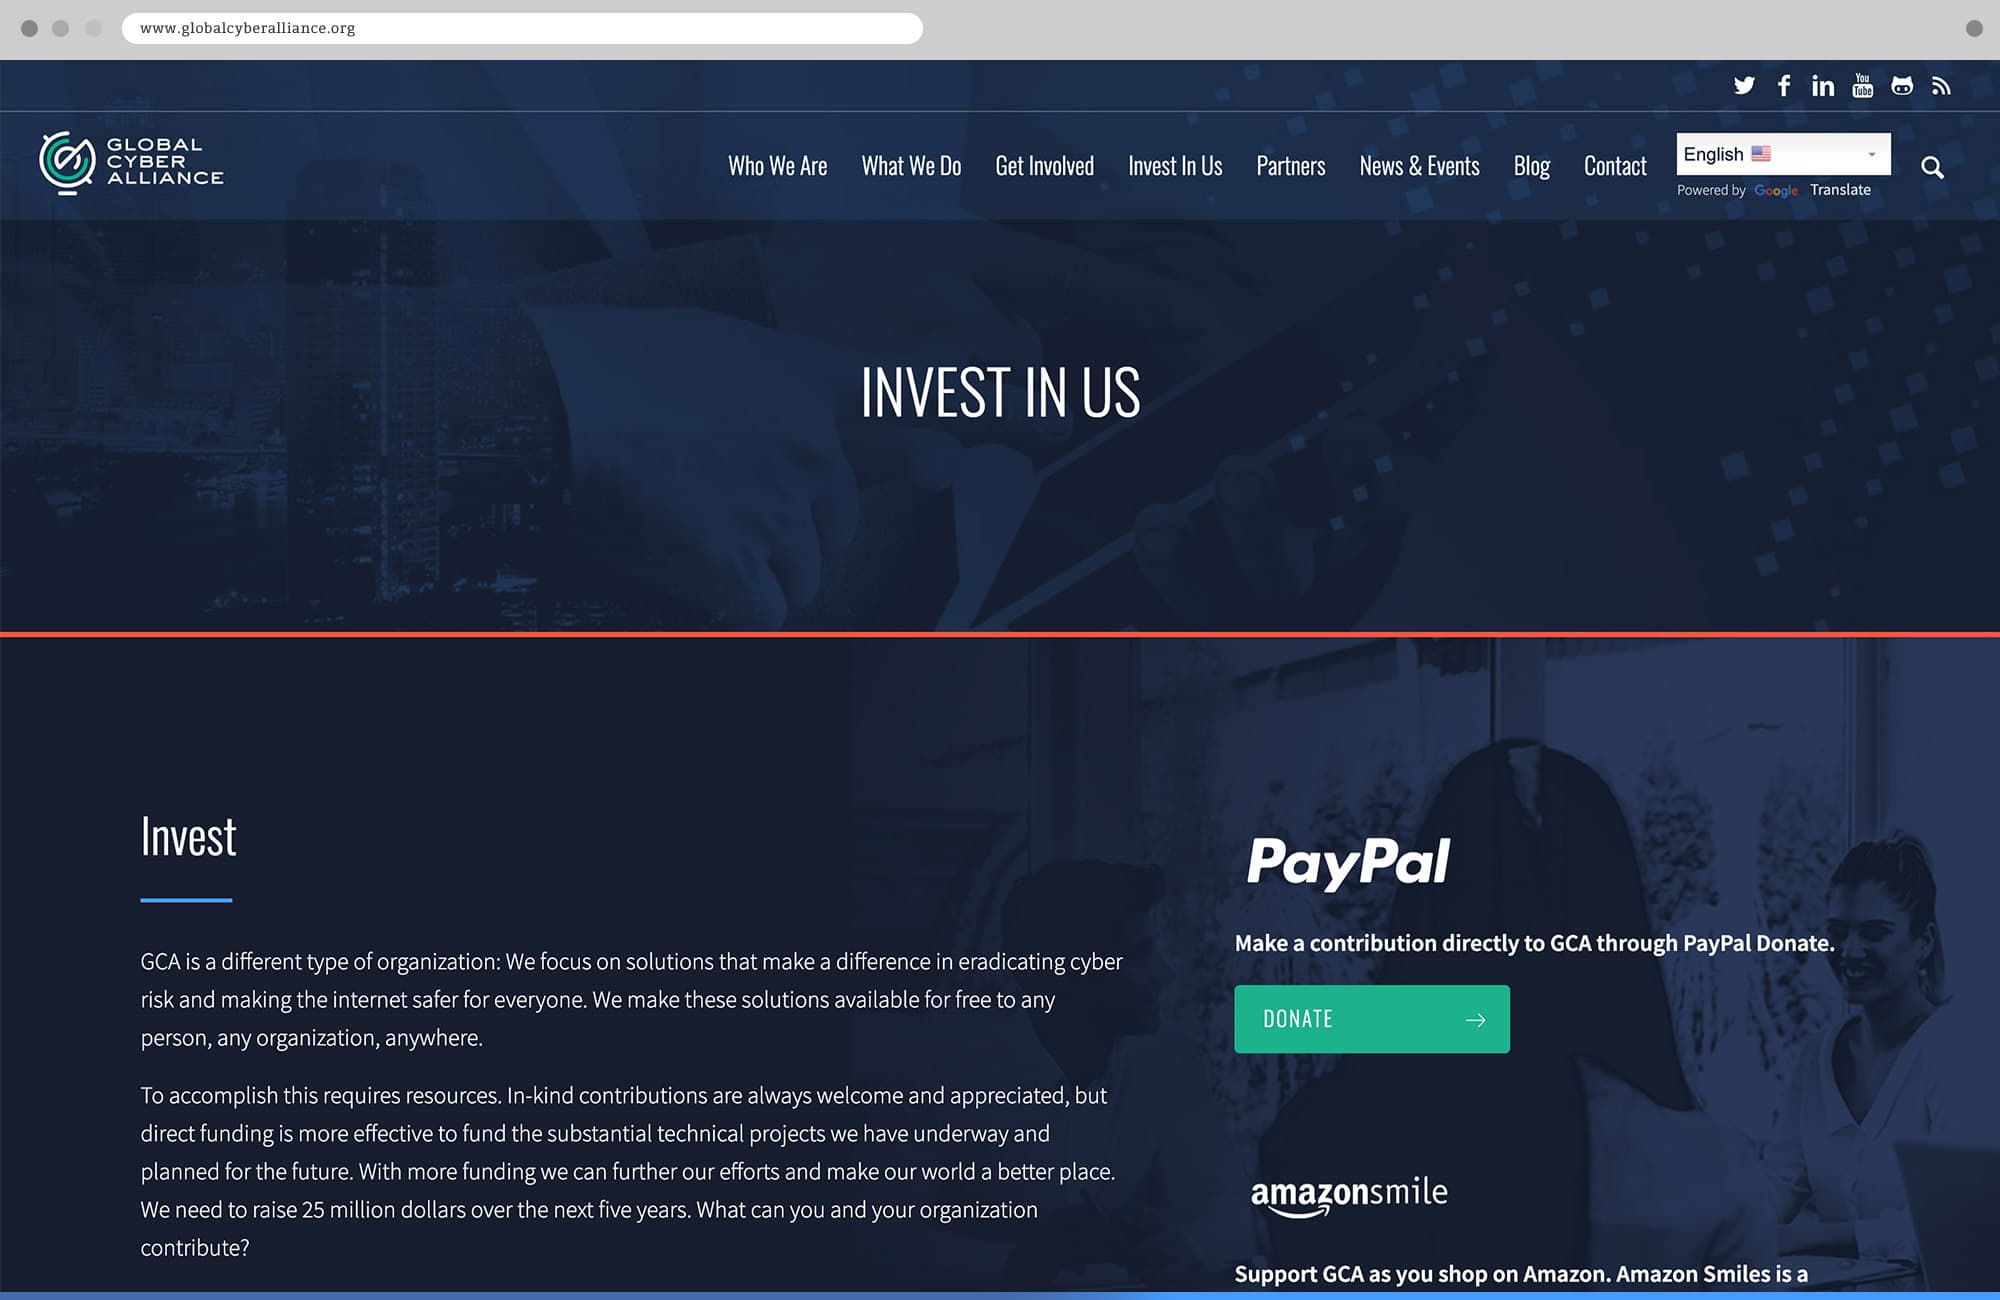 Punch - Global Cyber Alliance "Invest in Us" Page